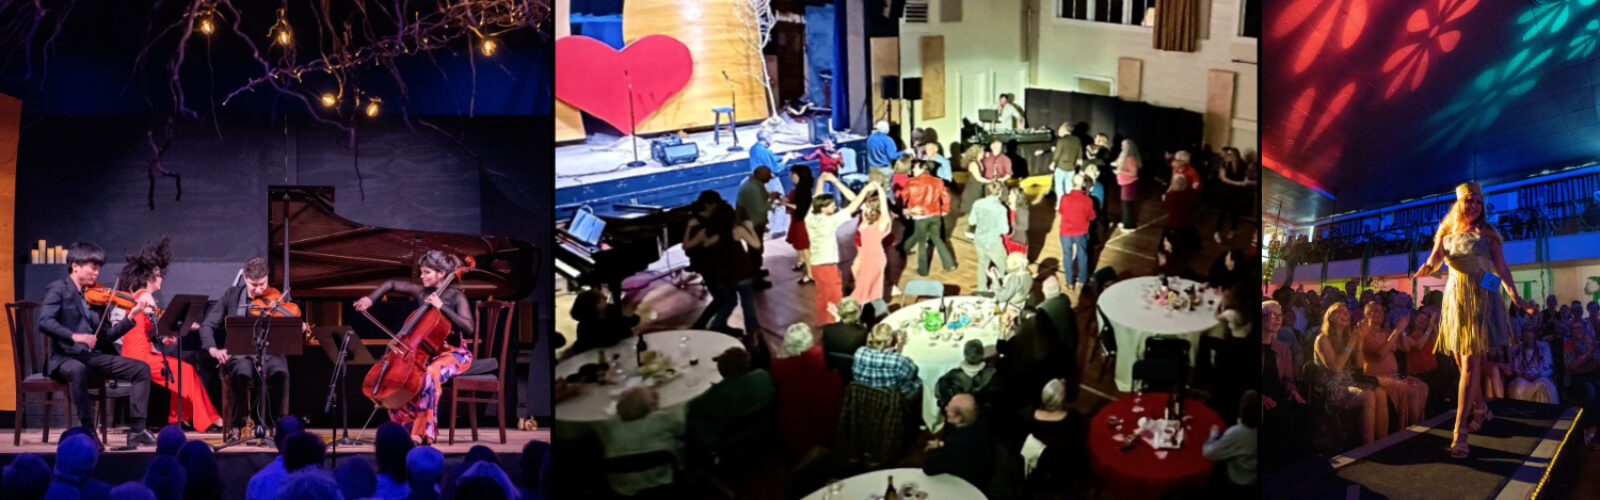 Three panel banner shows images from MV Chamber Music Festival, Valentine's Day Event and the Trashion Show.